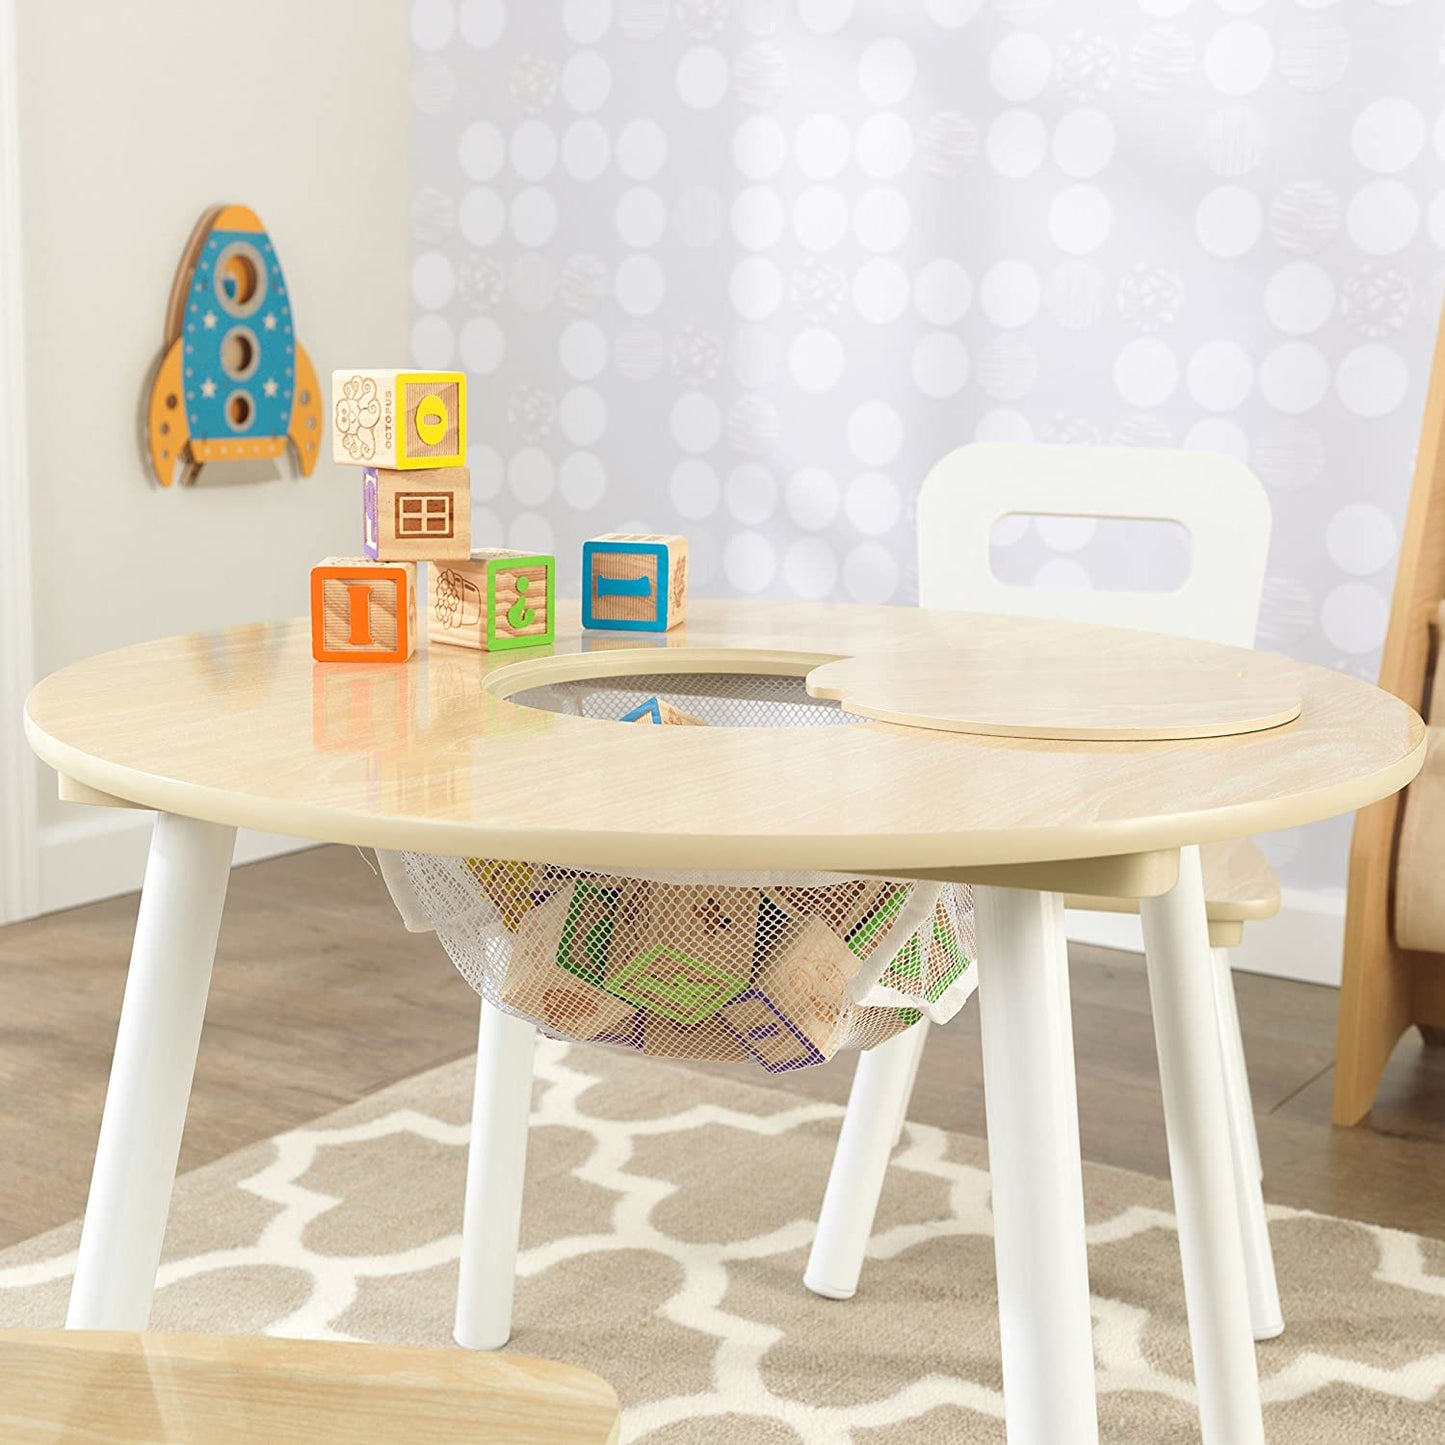 Round Table and 2 Chair Set for children (White Natural) - Little Kids Business